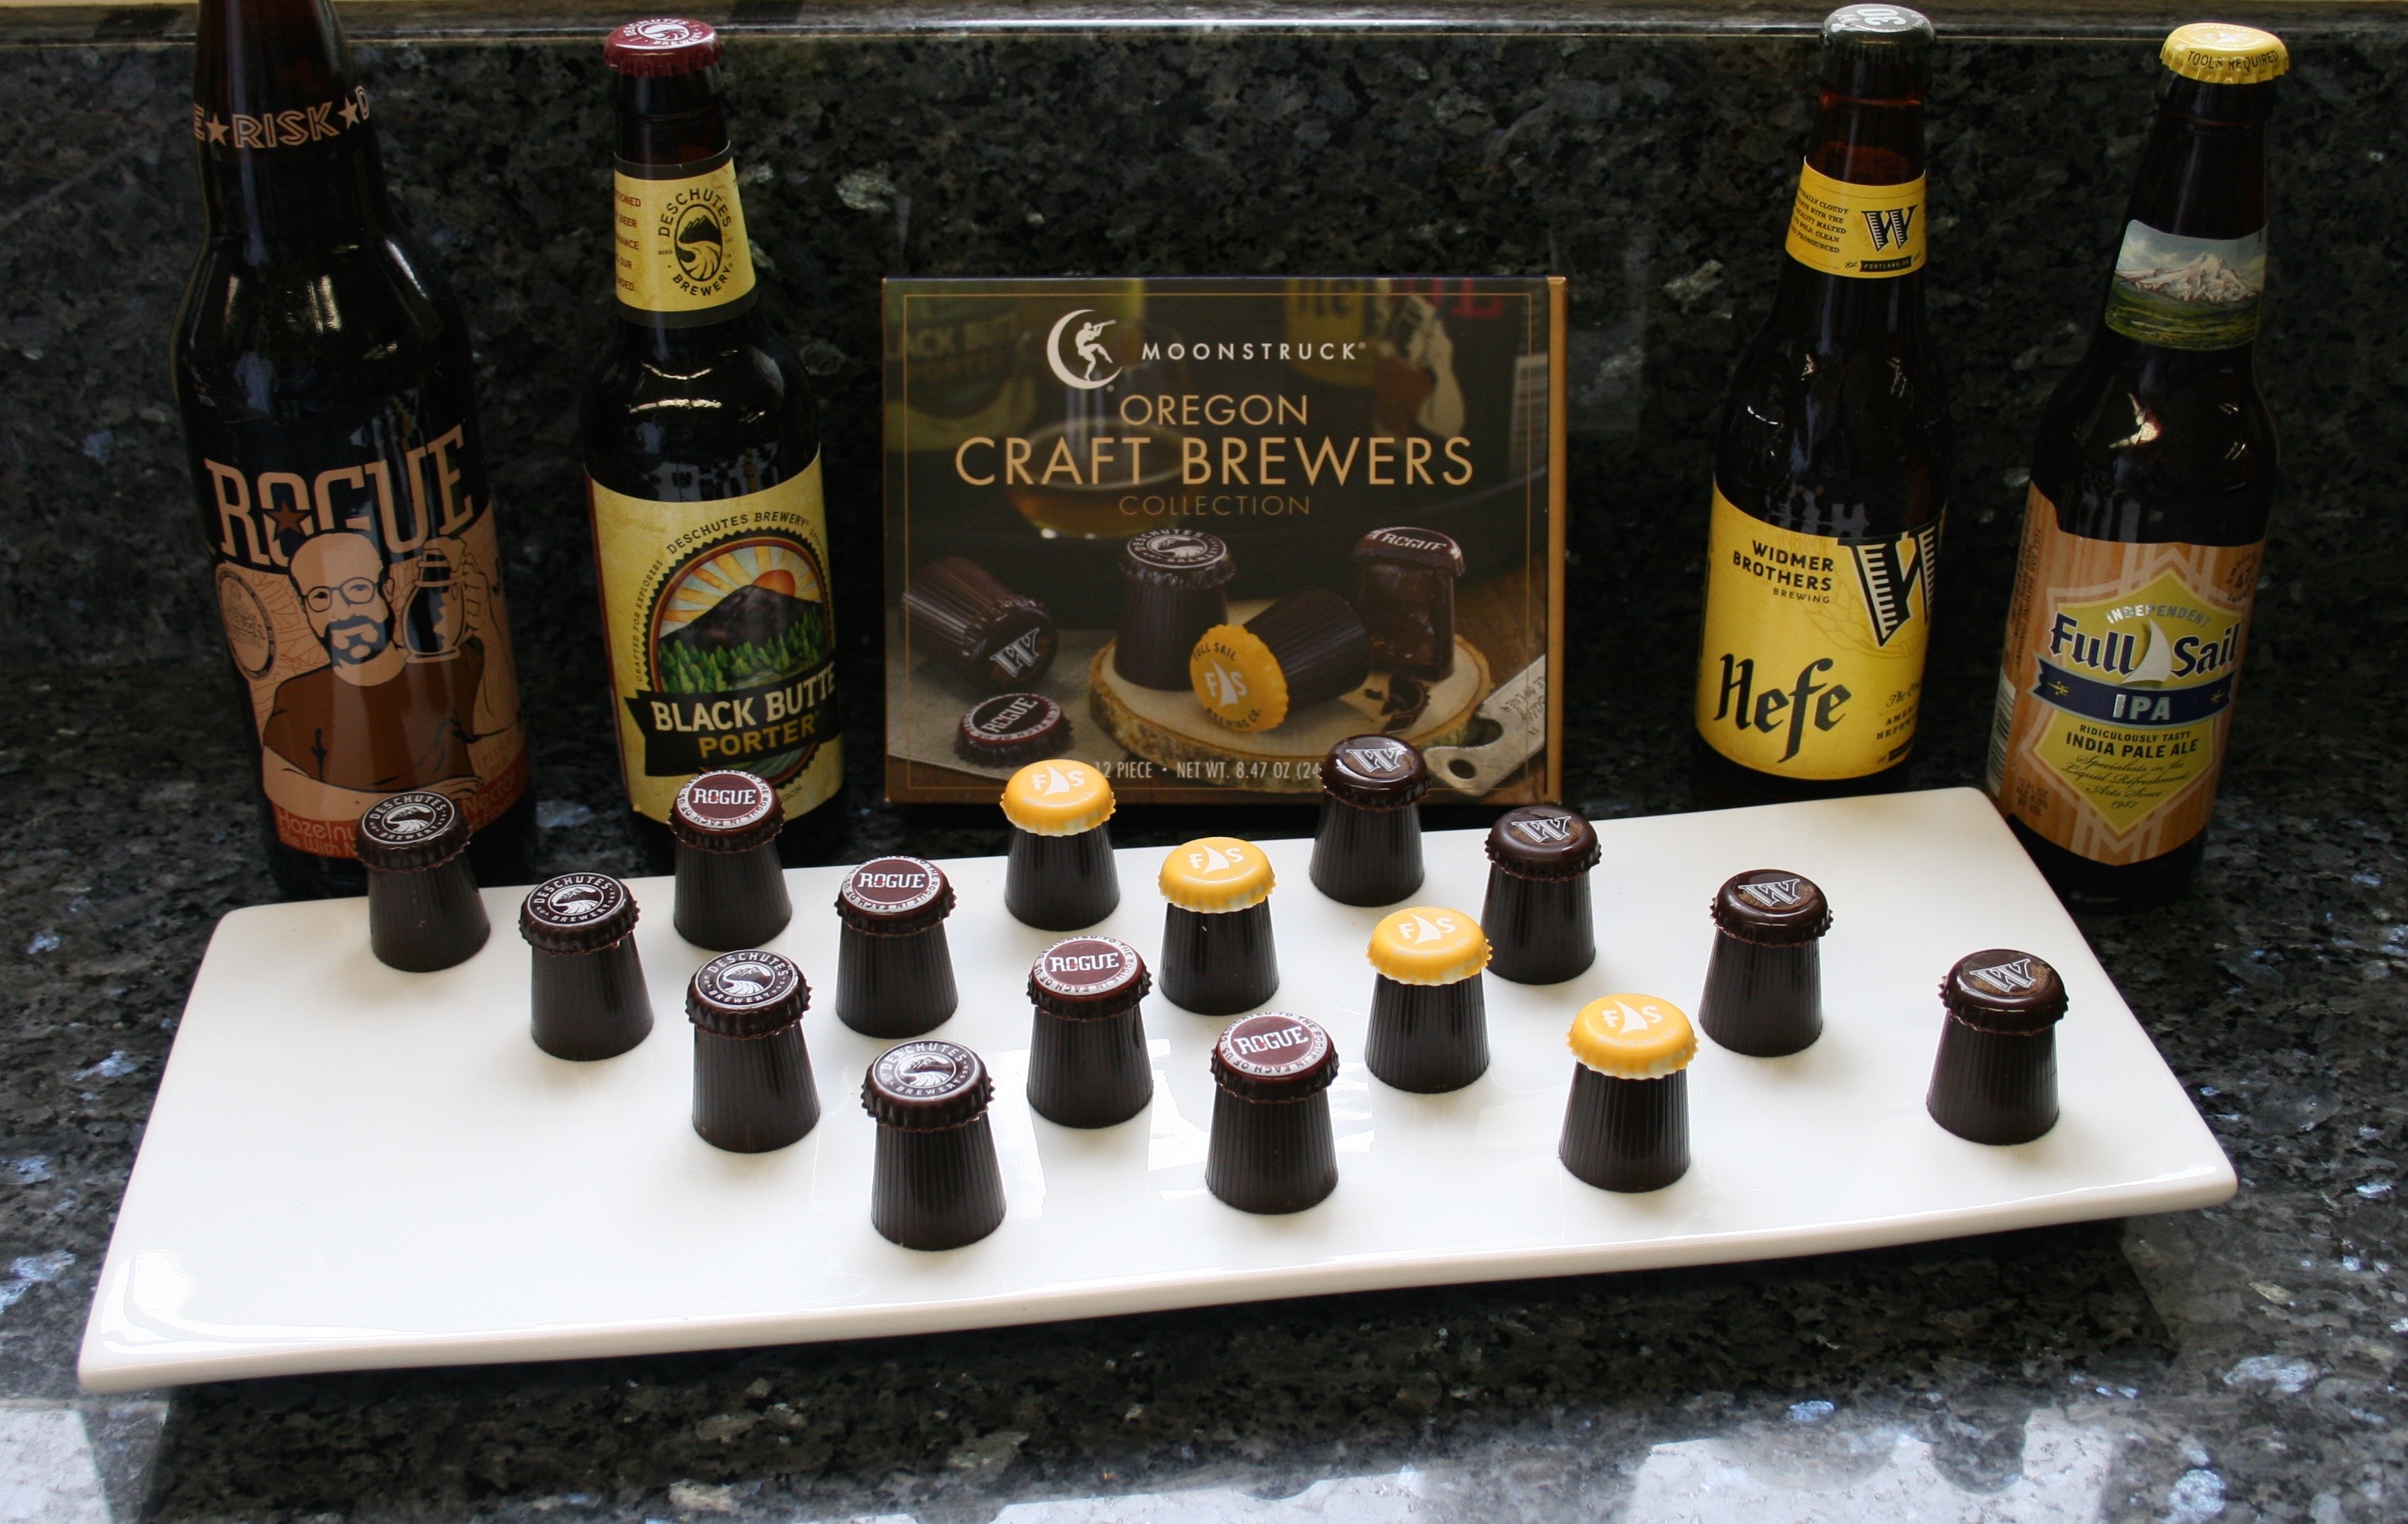 The complete Moonstruck Chocolate Oregon Craft Brewers Collection Truffles. (photo by D.J. Paul)